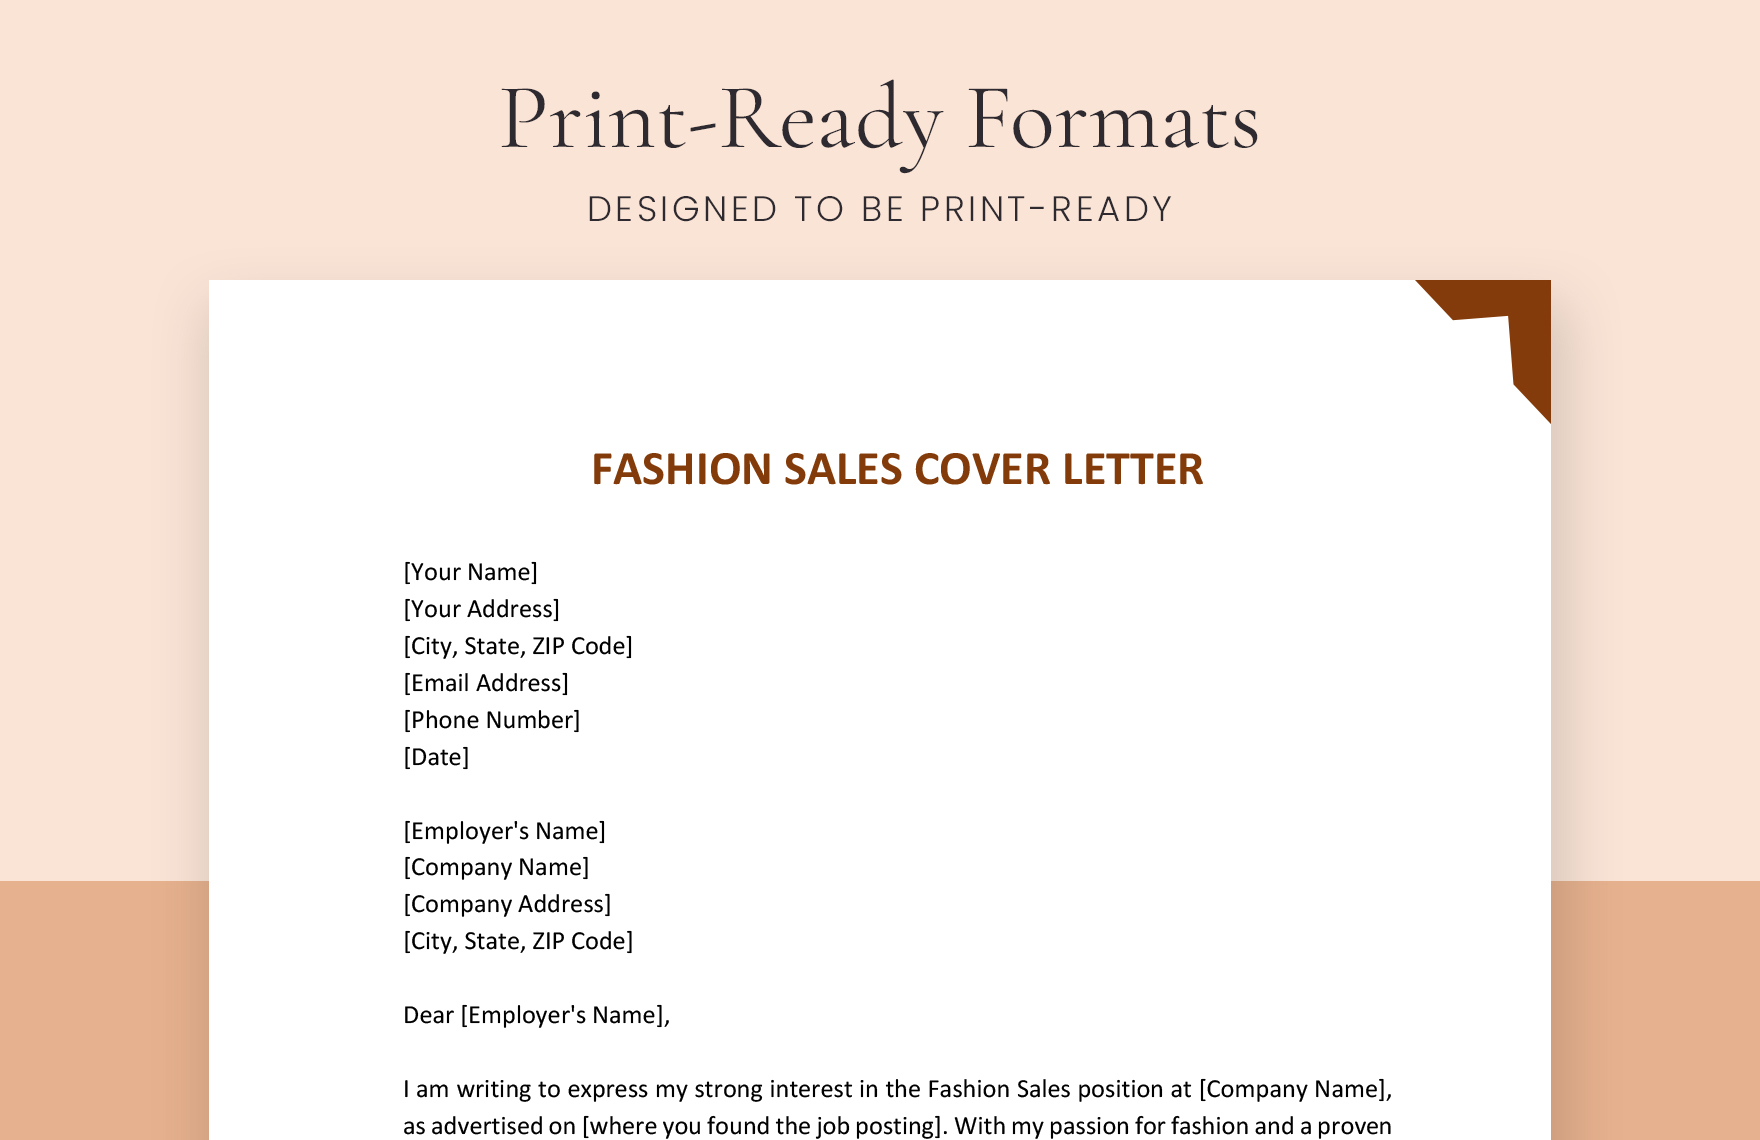 Fashion Sales Cover Letter